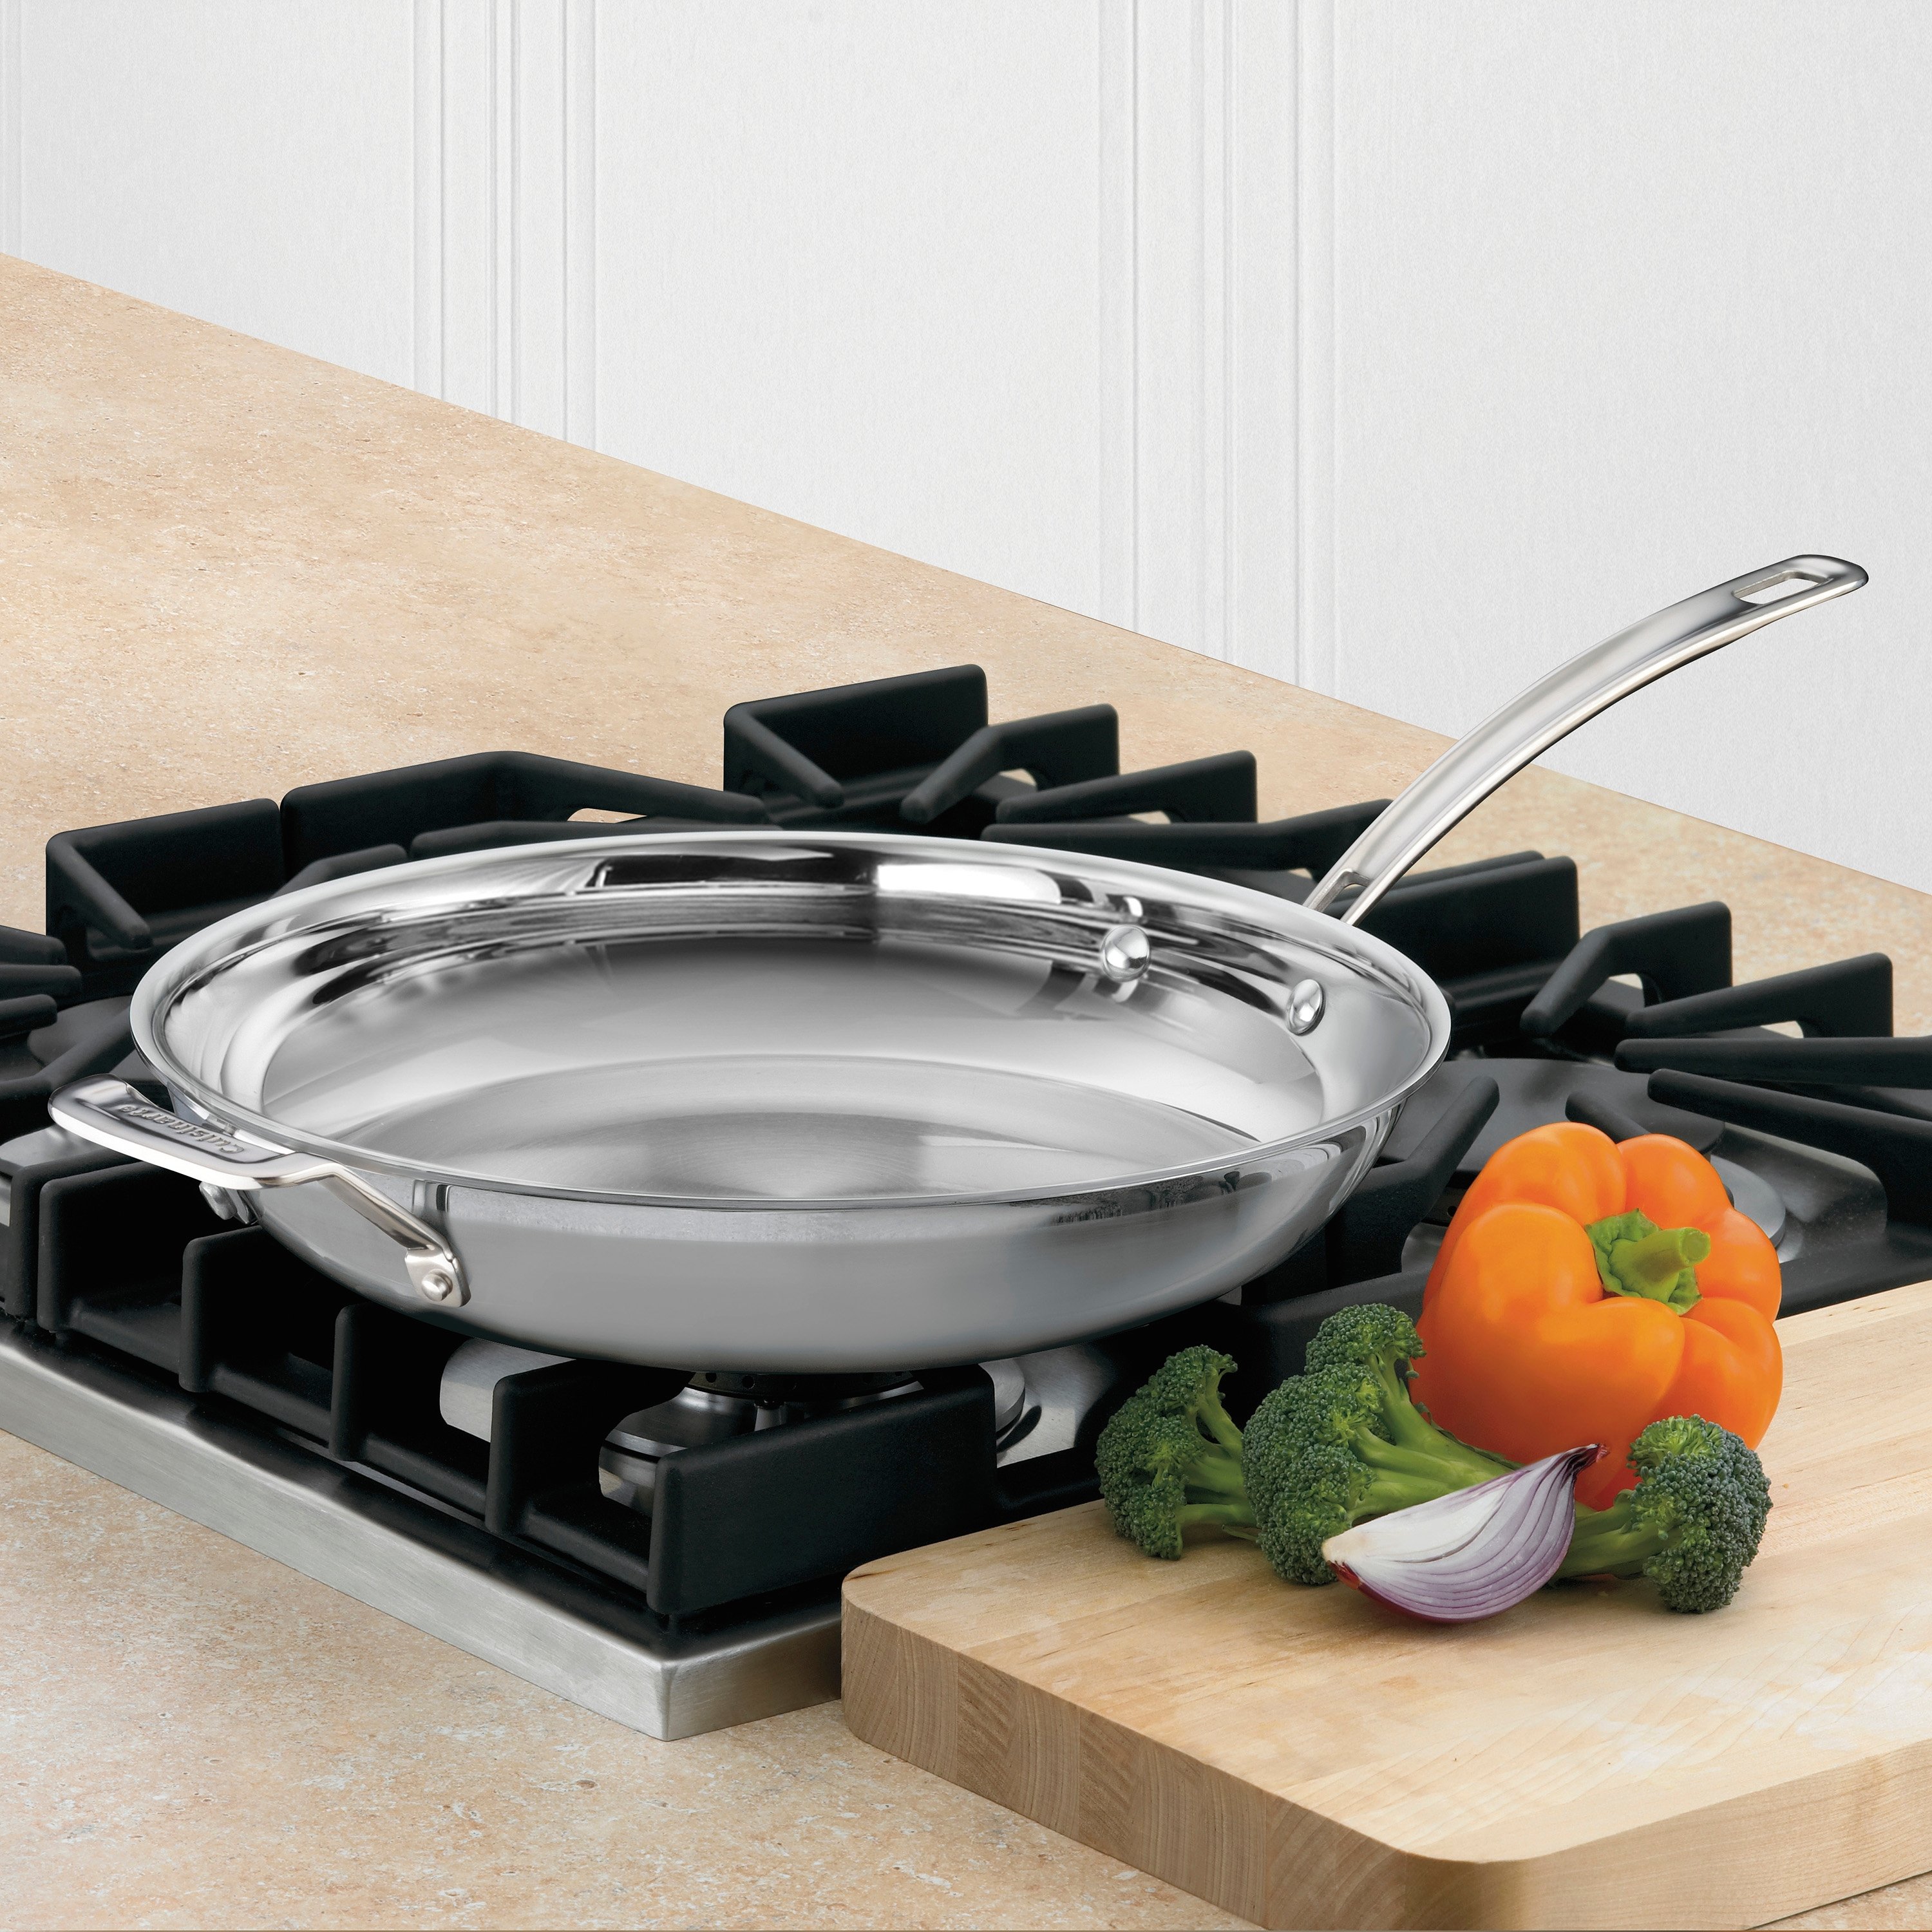 Cuisinart Tri Ply Vs Multiclad: Ultimate Cookware Duel!